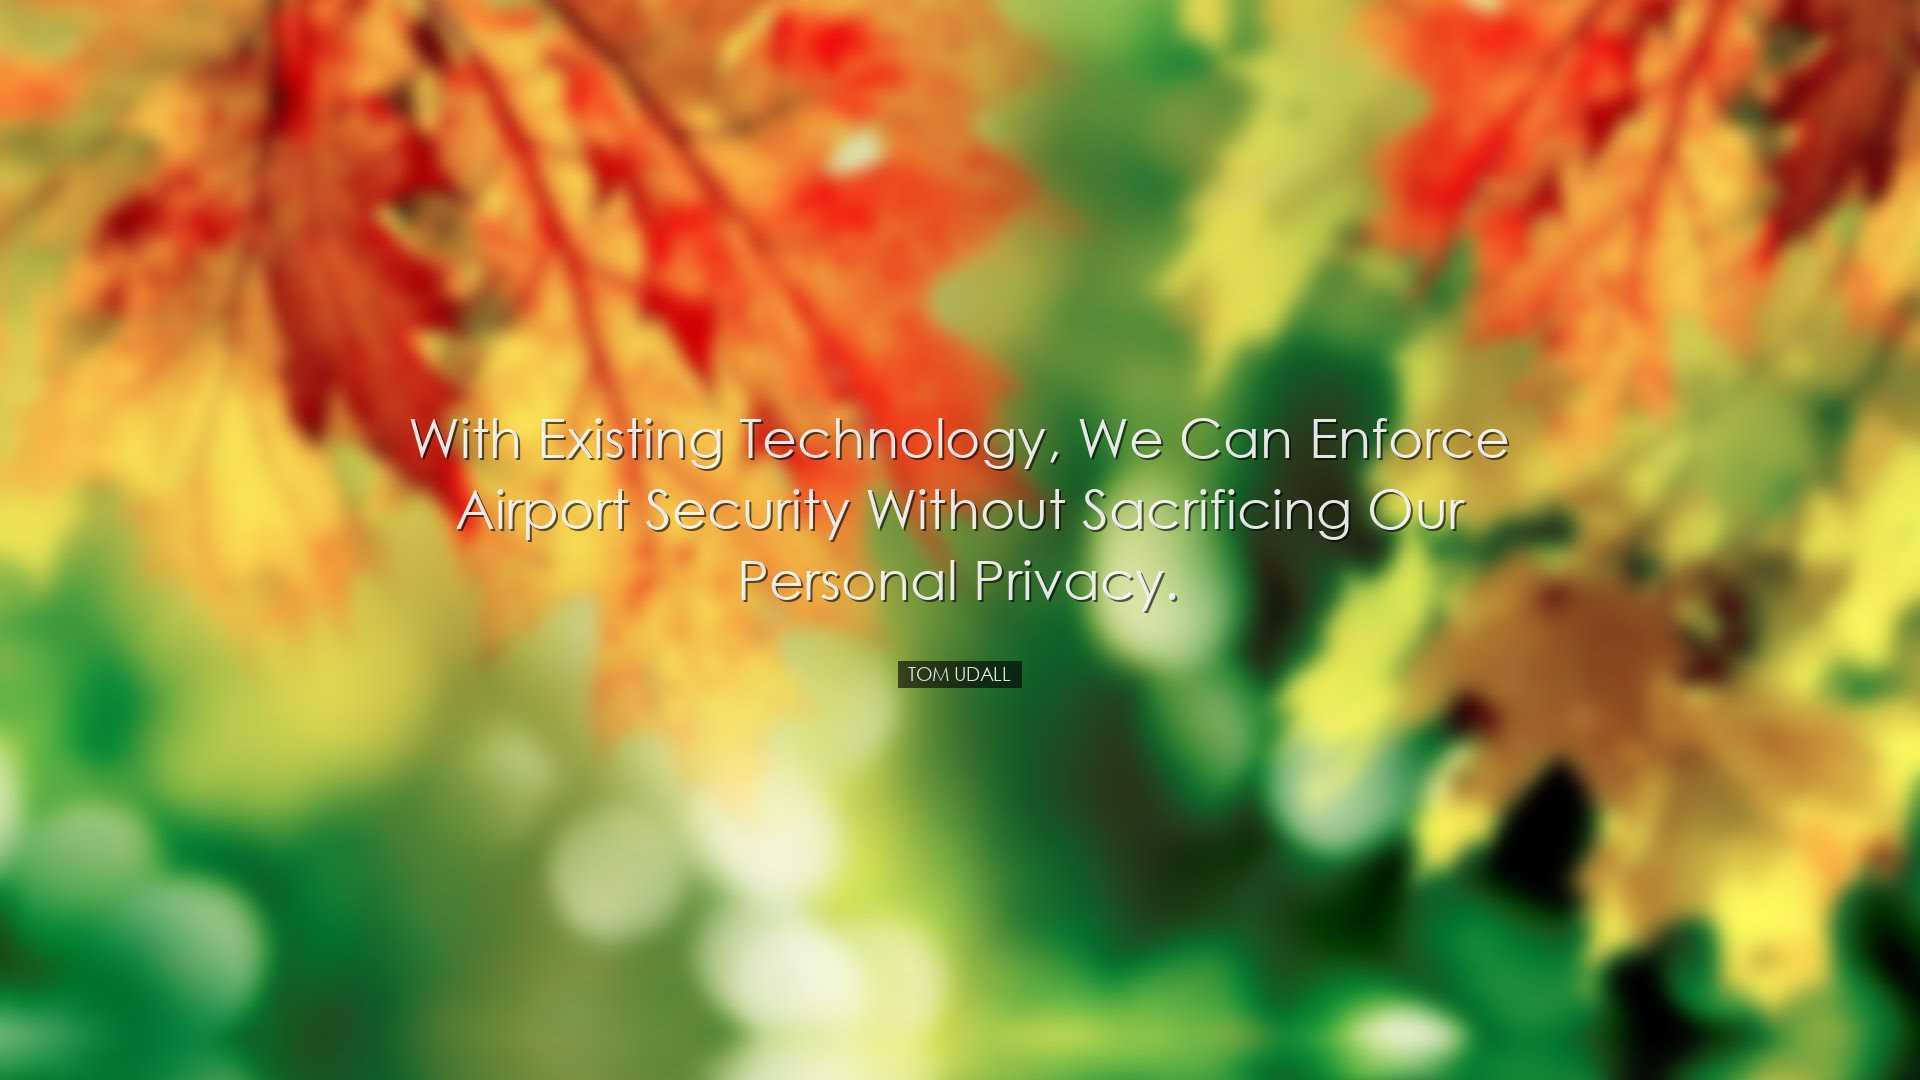 With existing technology, we can enforce airport security without